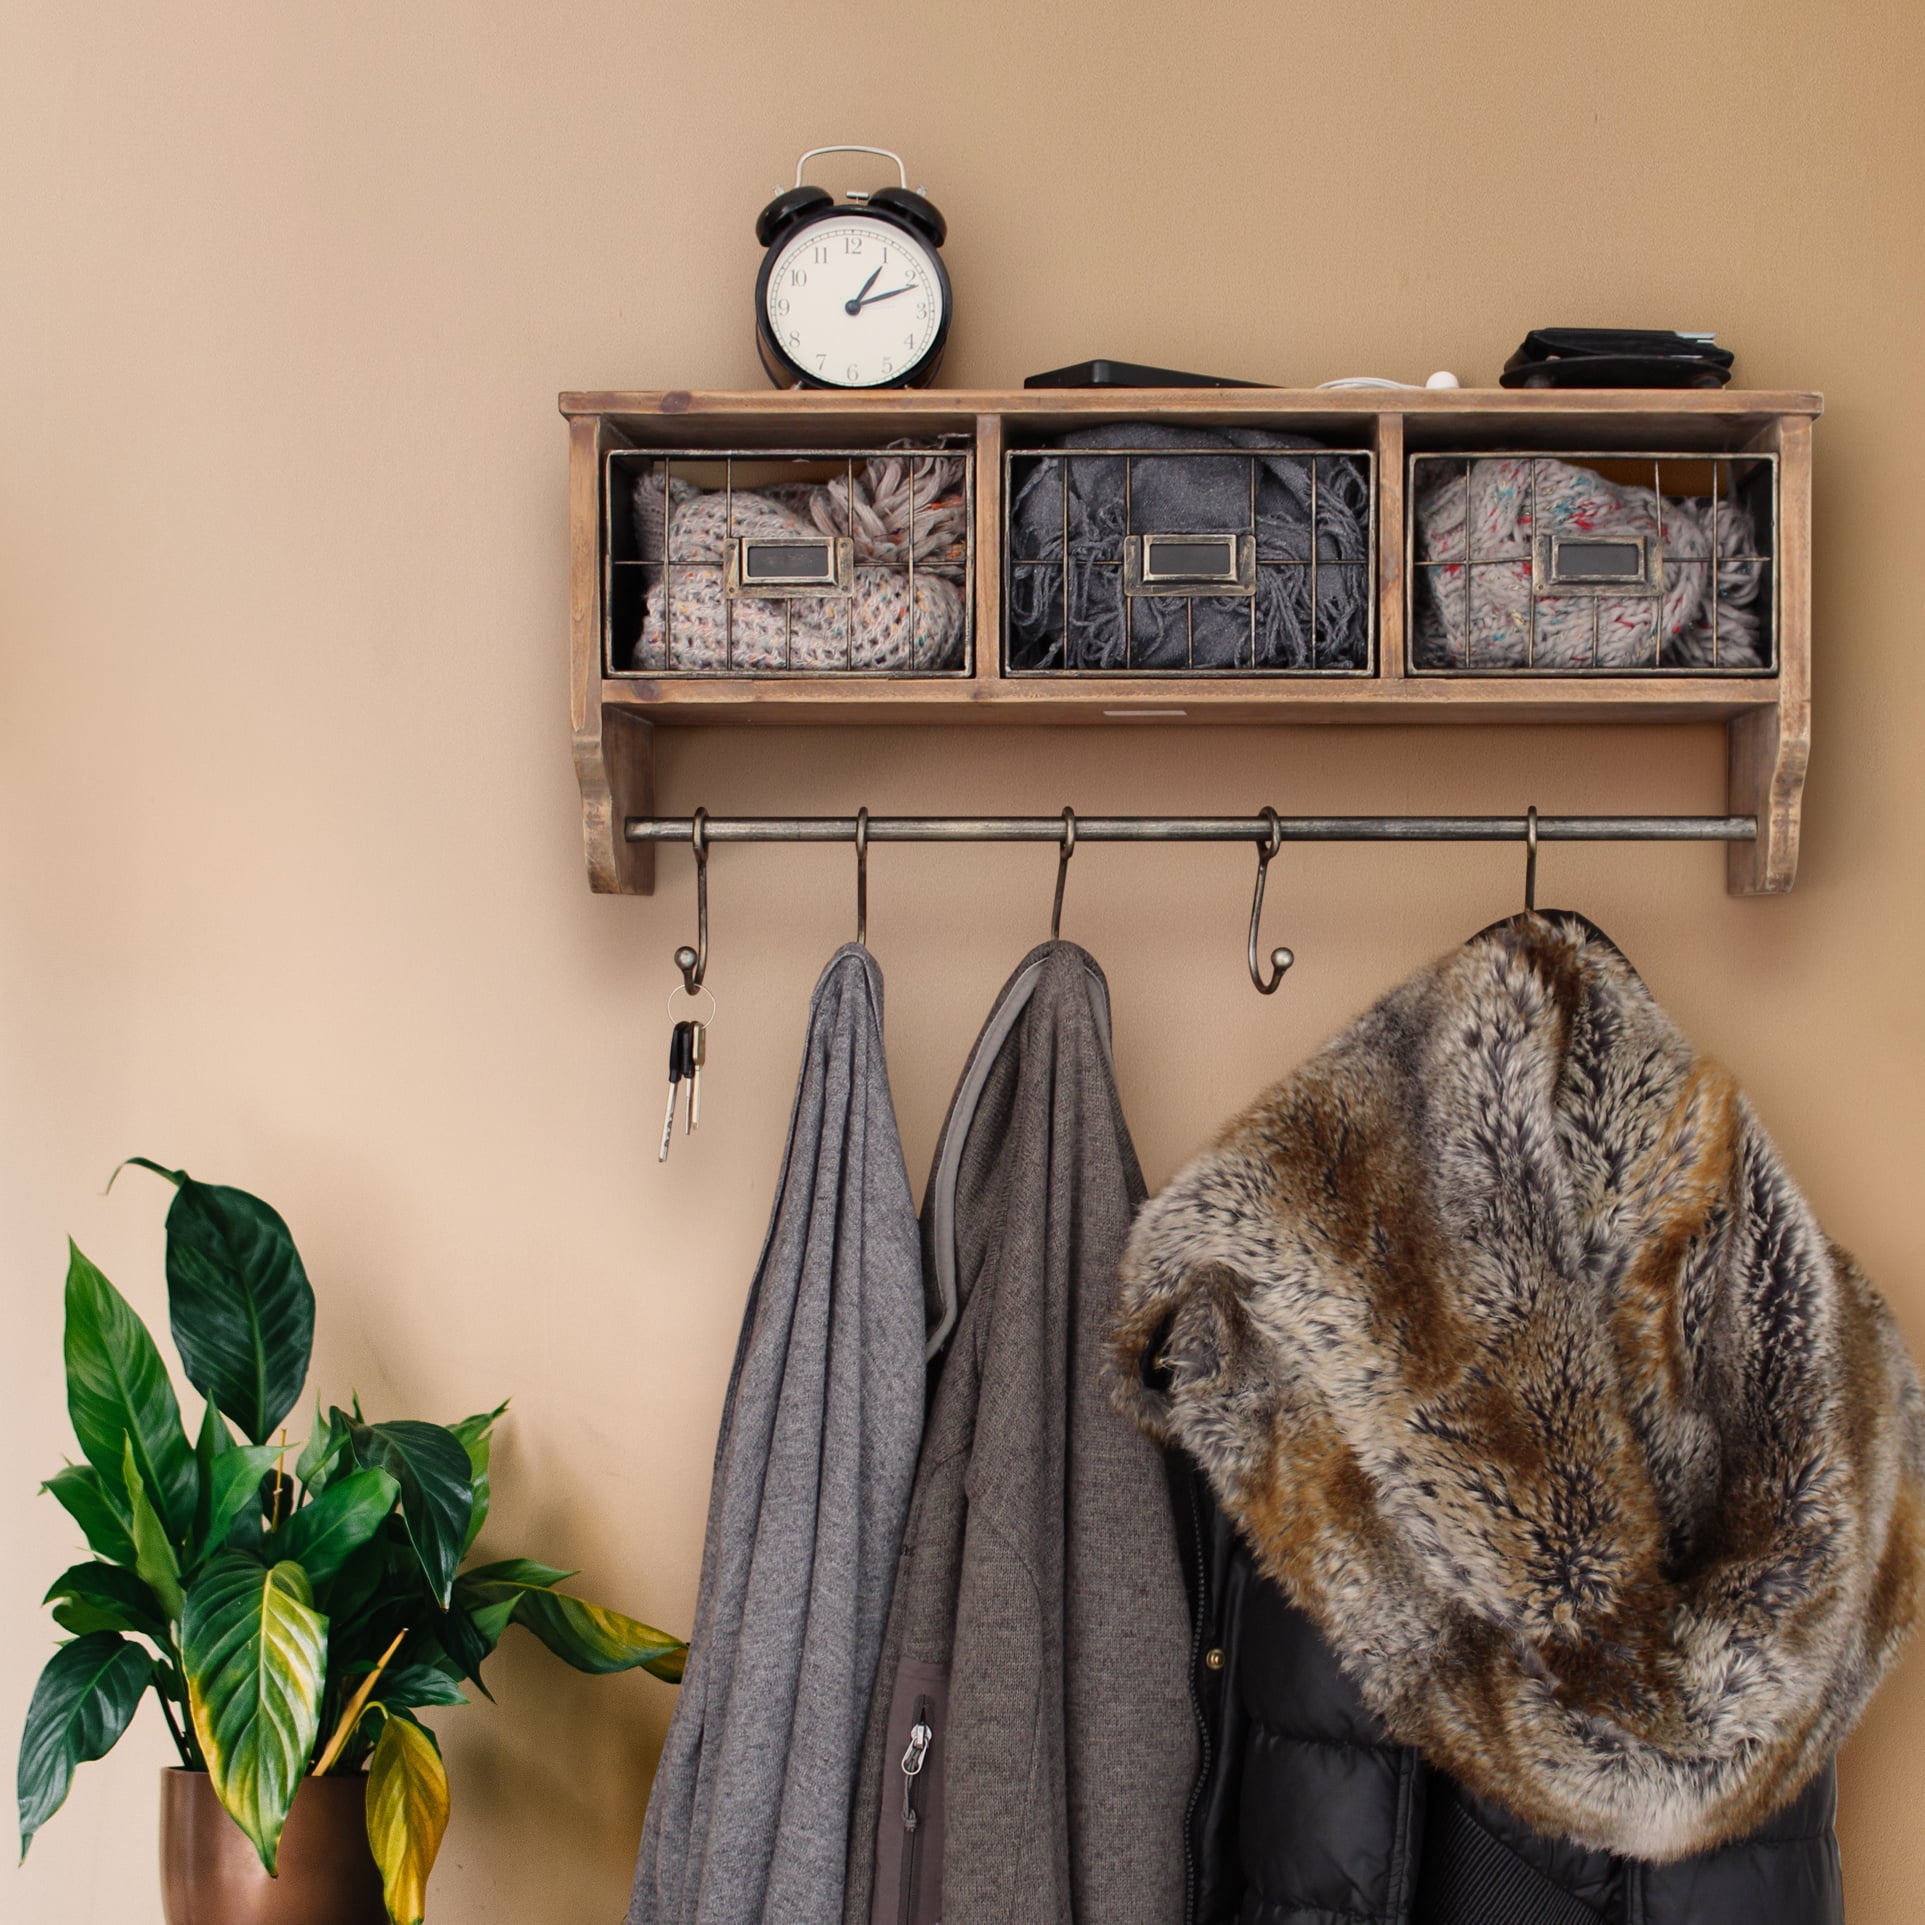 HBCY Creations Rustic Coat Rack Wall Mounted Shelf with Hooks  Baskets, Entryway  Organizer Wall Shelf with Coat Hooks and Cubbies, (Rustic Brown, 24 Inch) 